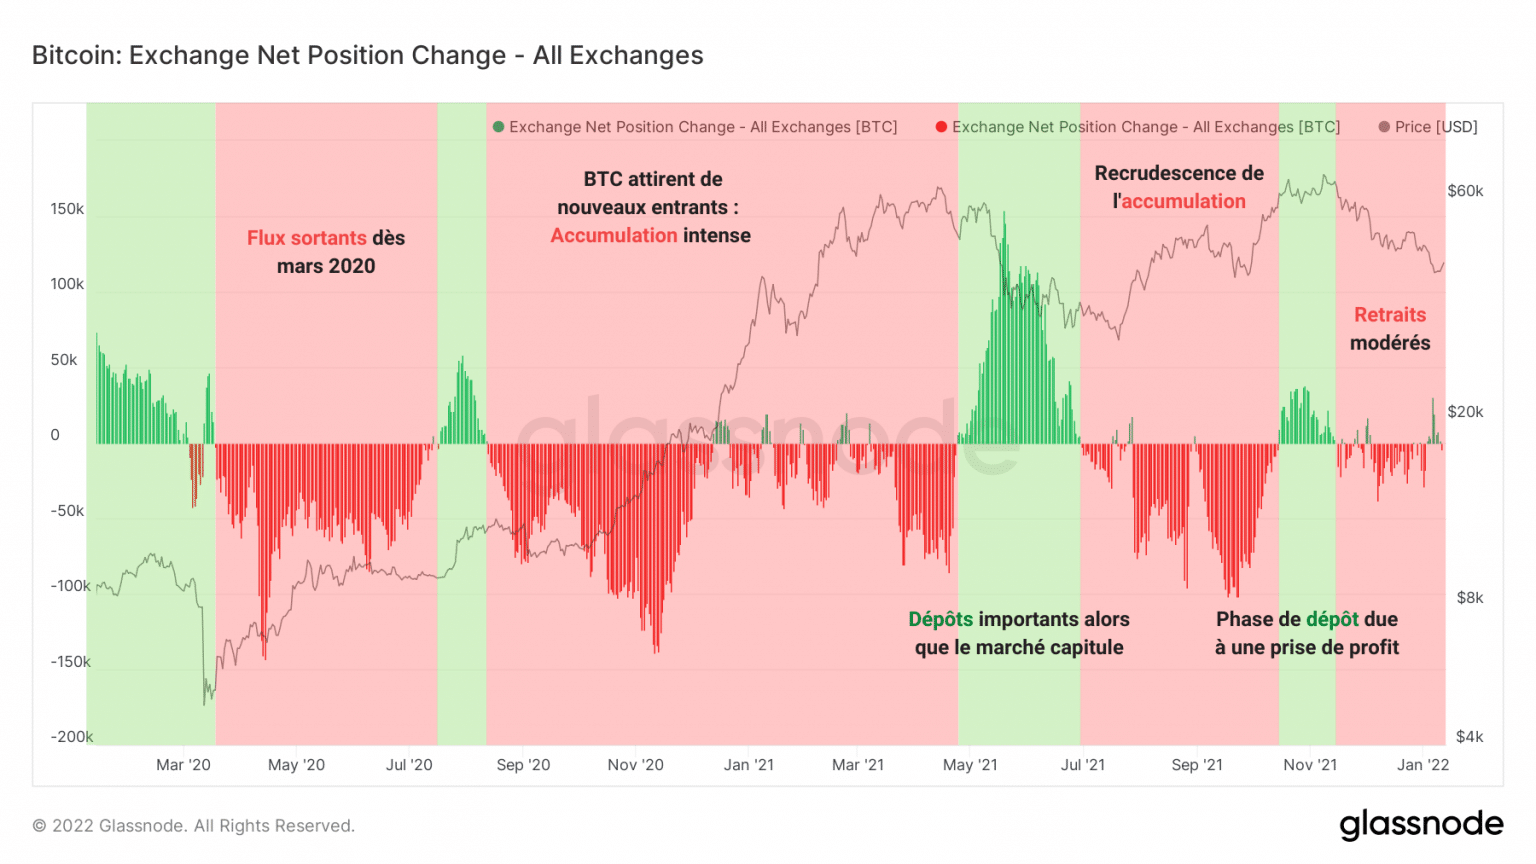 Chart of net change in trading position (Source: Glassnode)